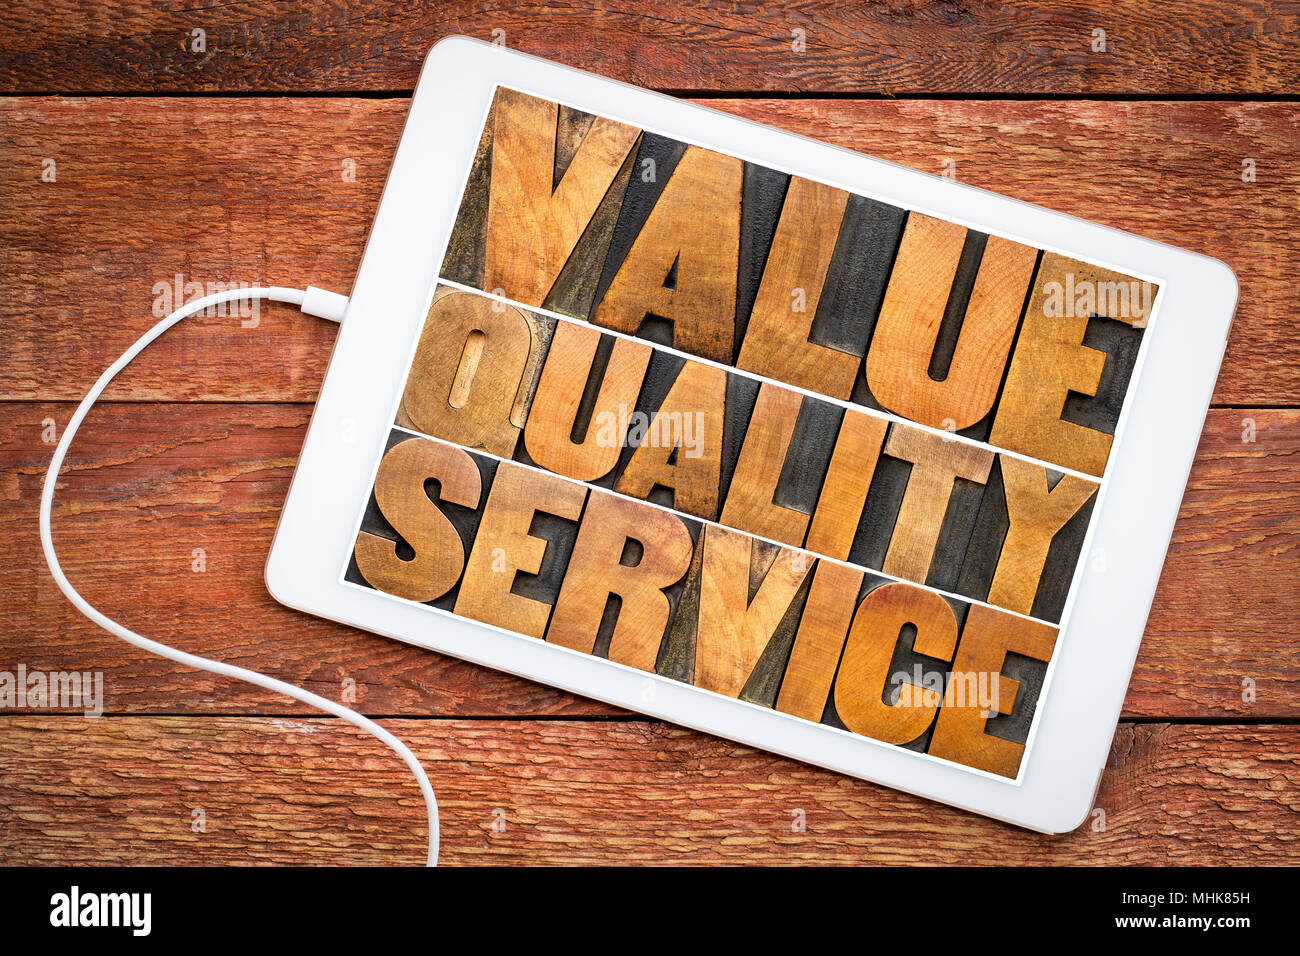 value, quality, service - business mantra or motto concept - word abstract in vintage letterpress wood type printing blocks on a digital tablet Stock Photo